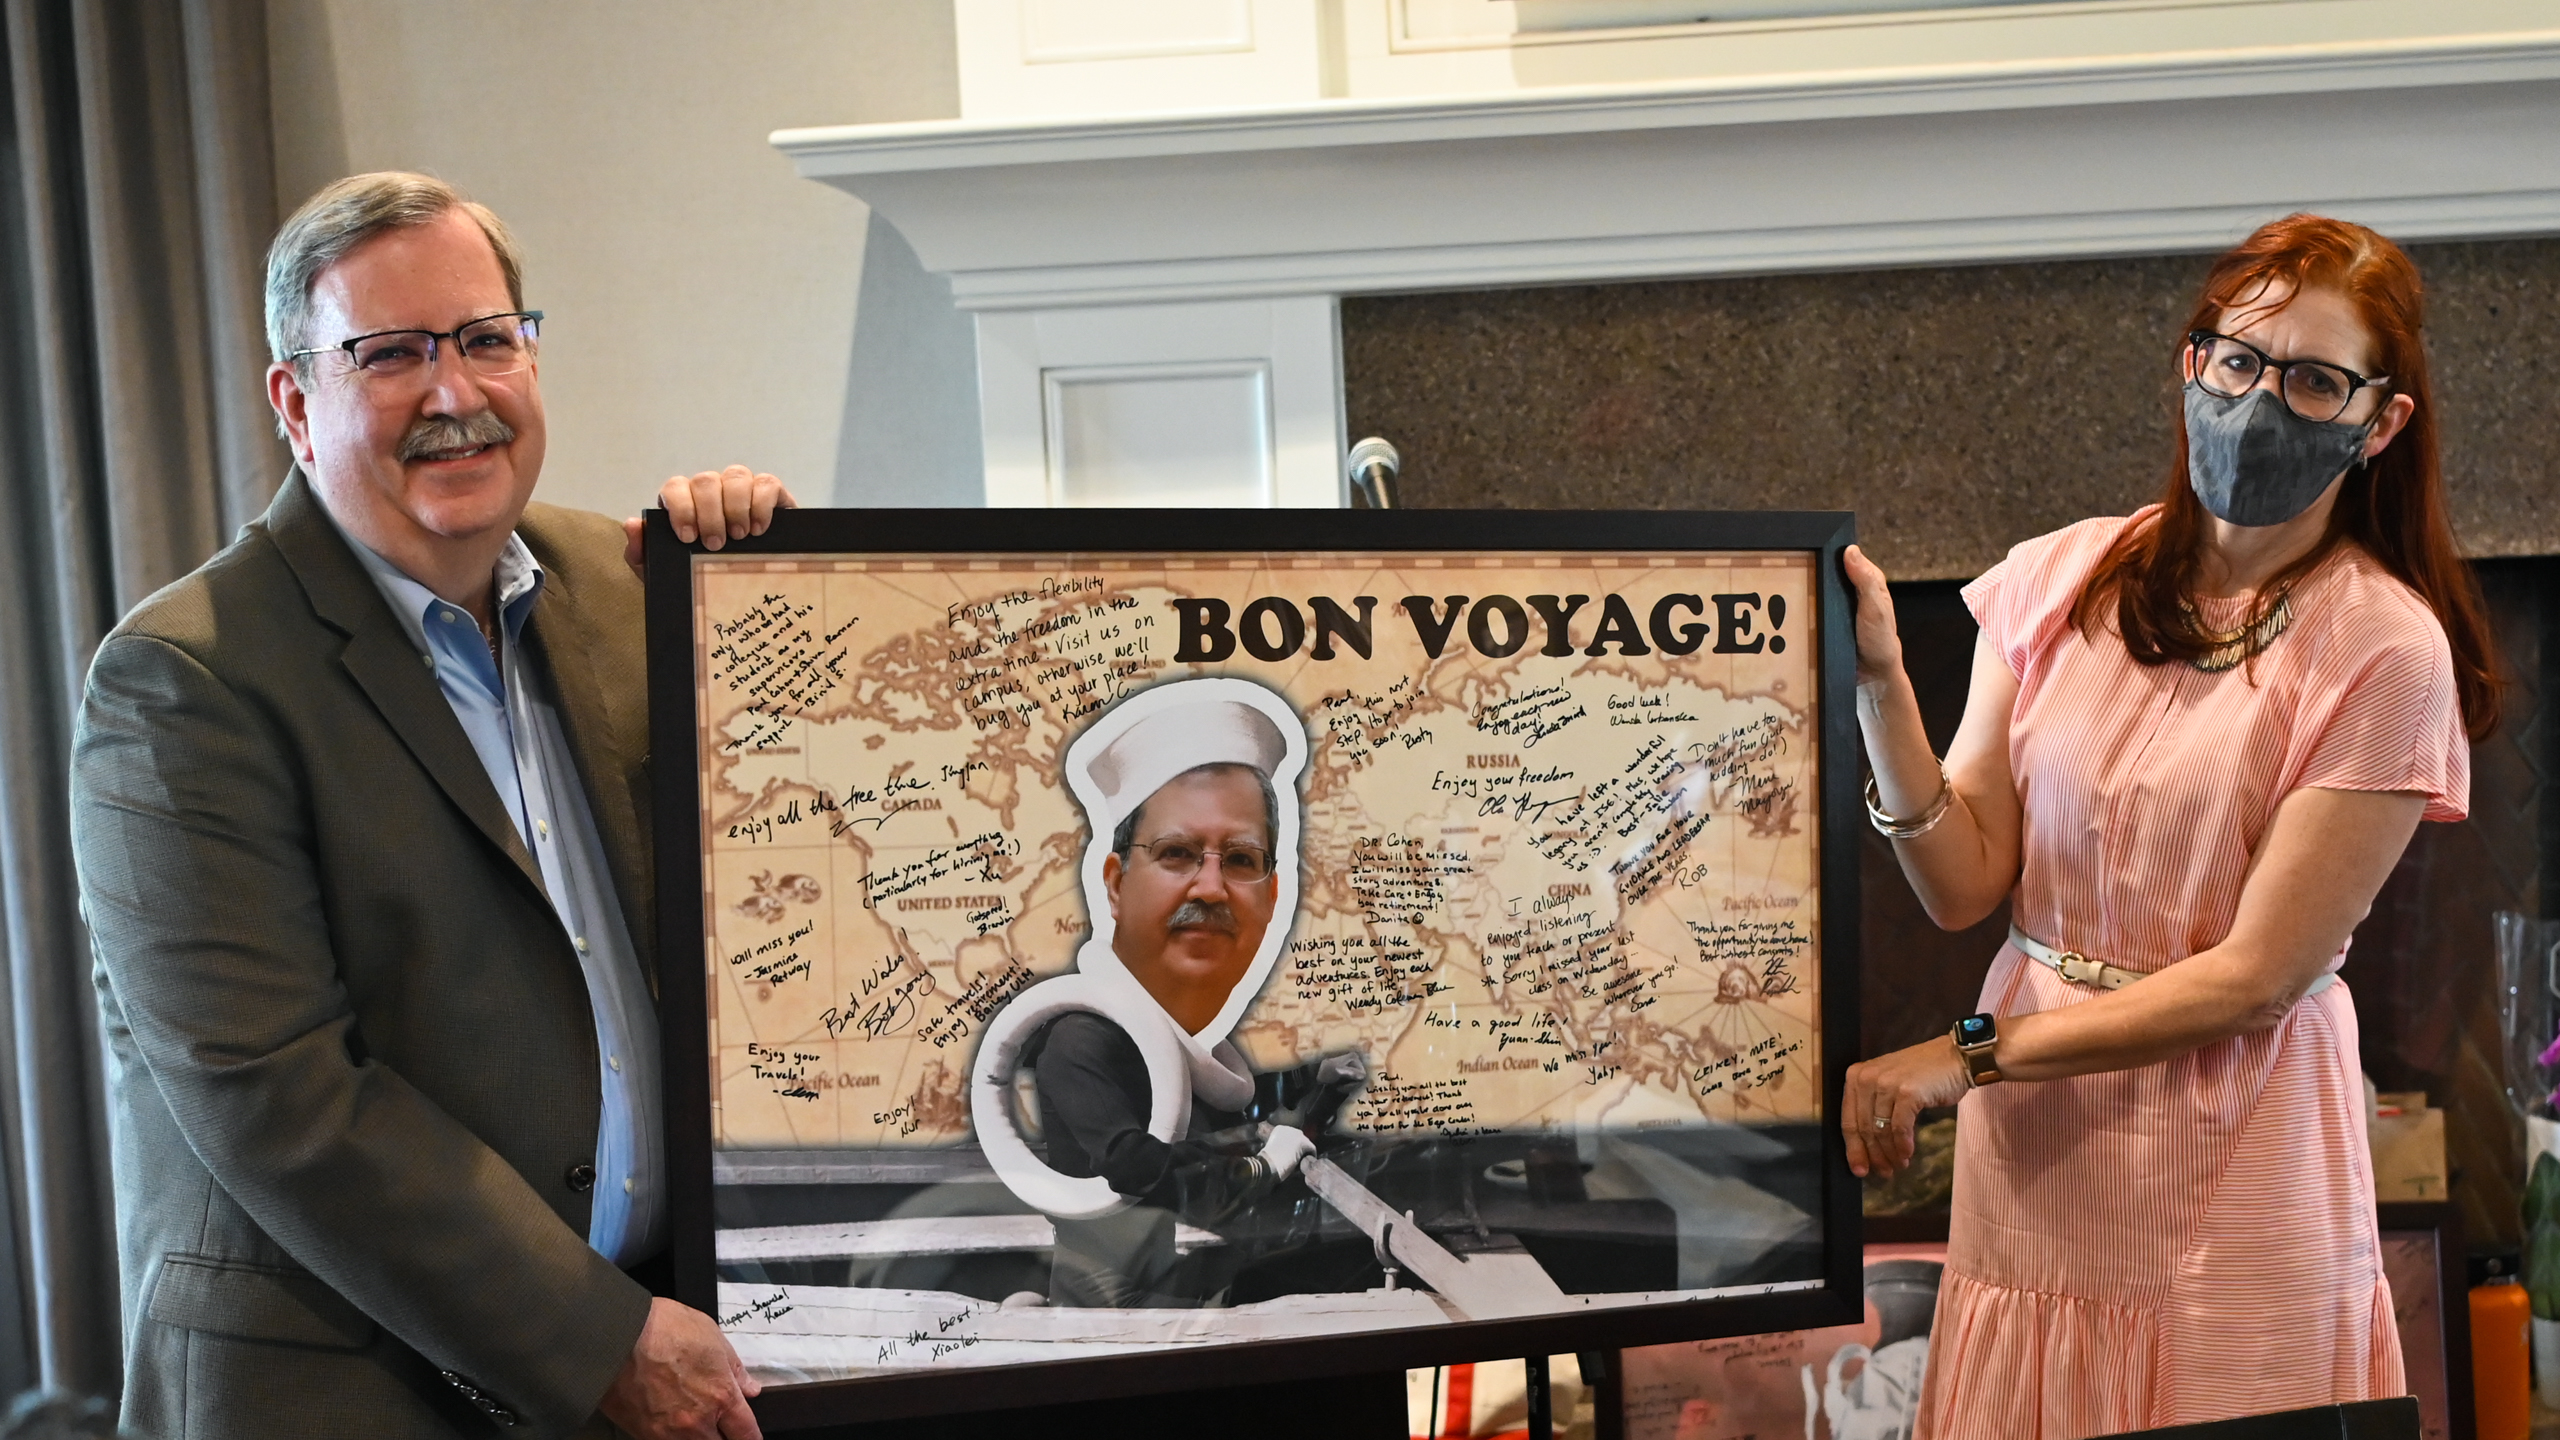 Julie Swann gives Paul Cohen a goodbye poster that says Bon Voyage. The poster is covered with signatures.